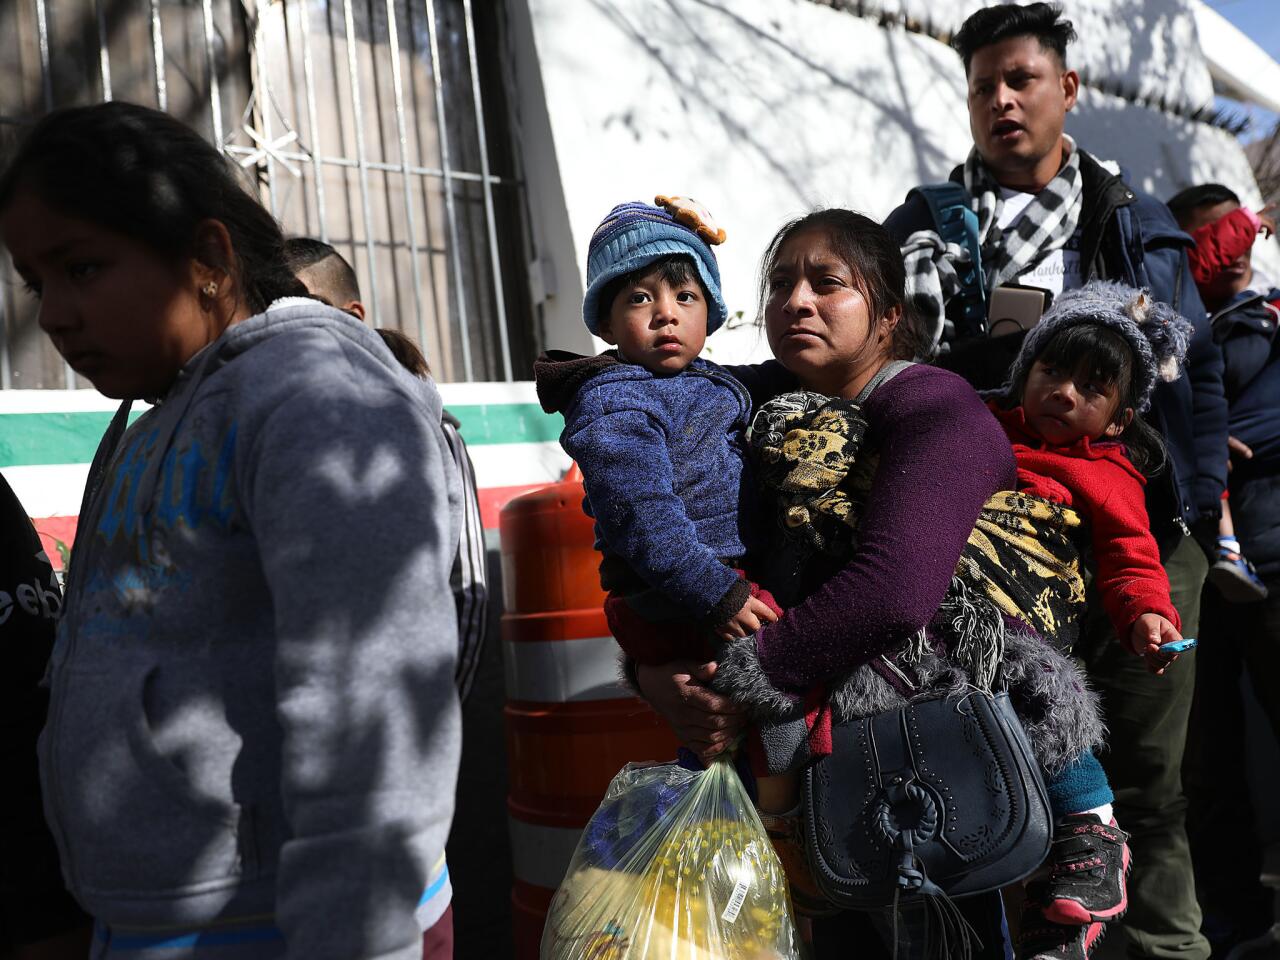 Migrants from Honduras, Mexico, Cuba and Guatemala wait to turn themselves in to U.S. Customs and Border Protection agents in Ciudad Juarez, Mexico. U.S. border officials finalized plans to require asylum seekers to remain in Mexico while their cases are considered in the United States.